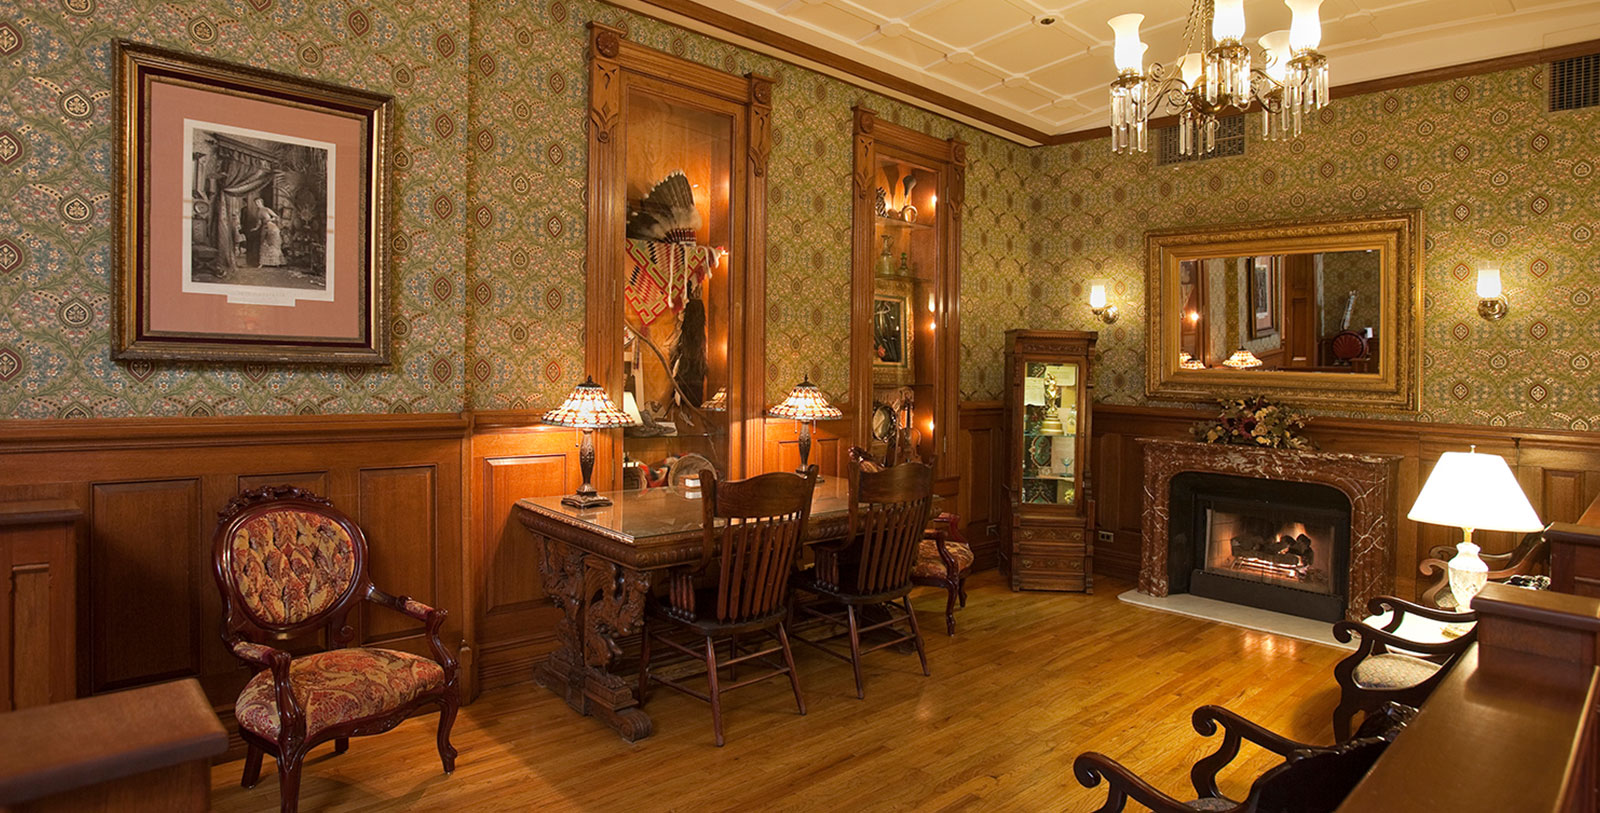 Image of Lounge, The Strater Hotel, 1887, Member of Historic Hotels of America, in Durango, Colorado, Hot Deals